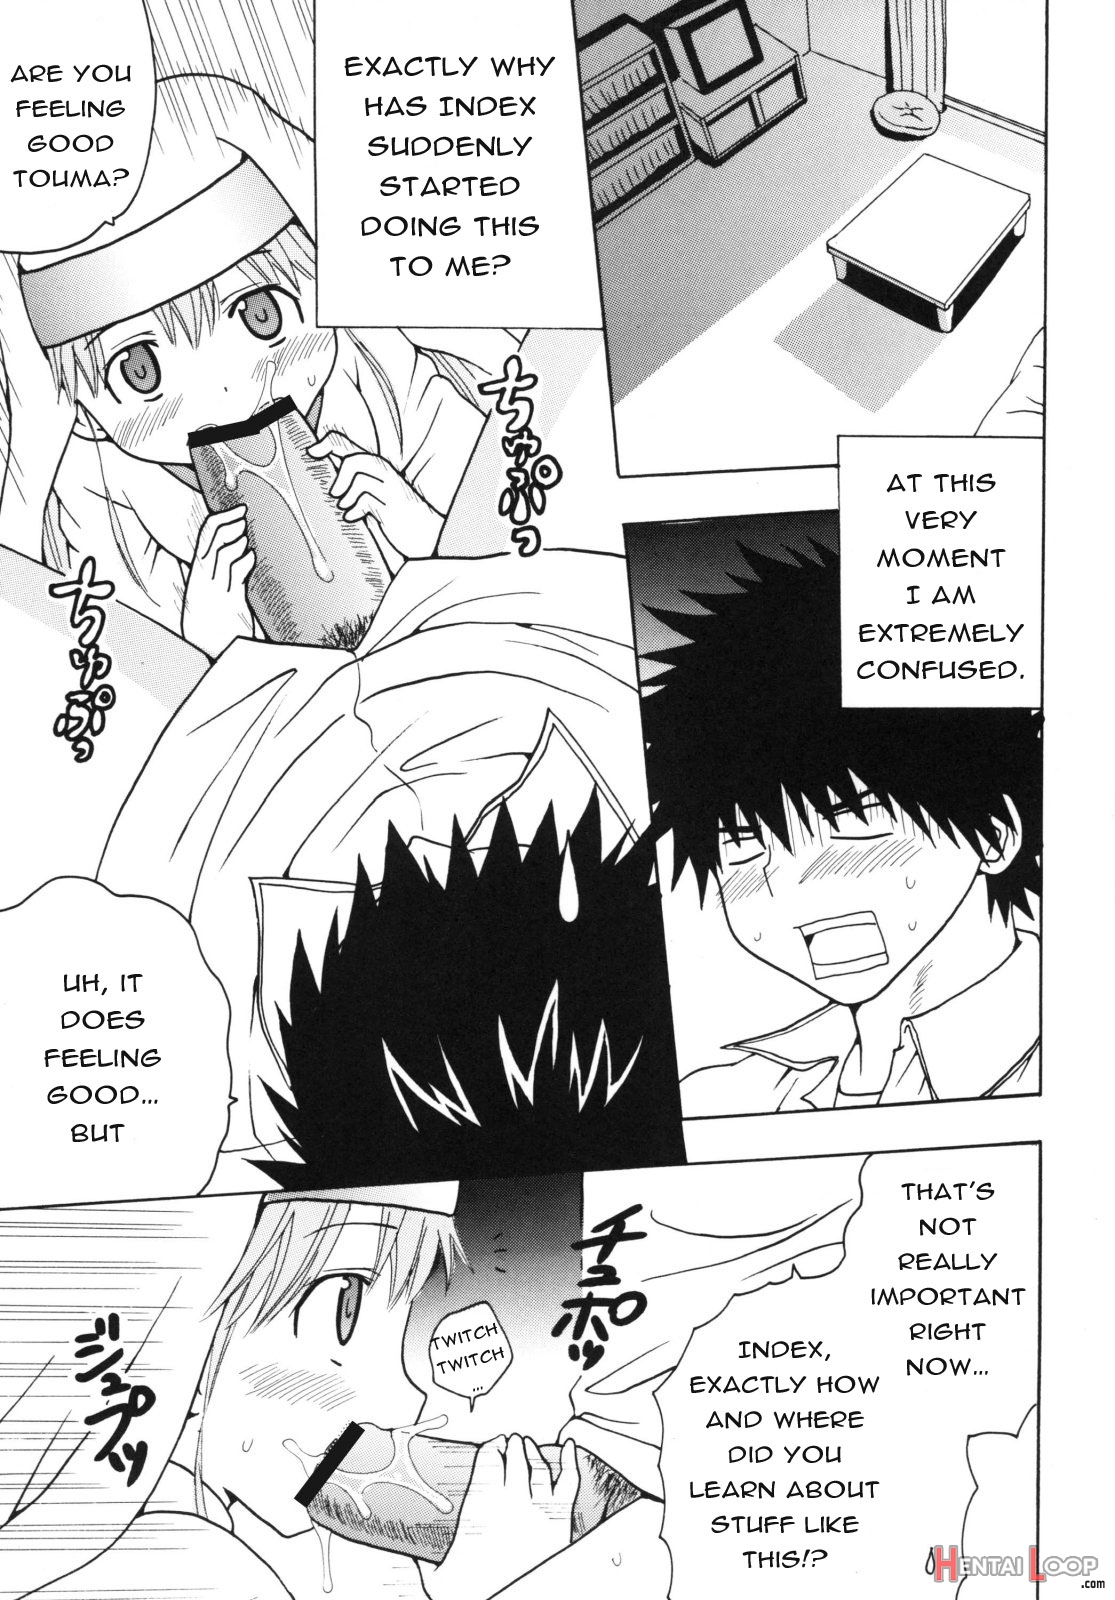 A Certain Magical Lewd Index #2 page 25